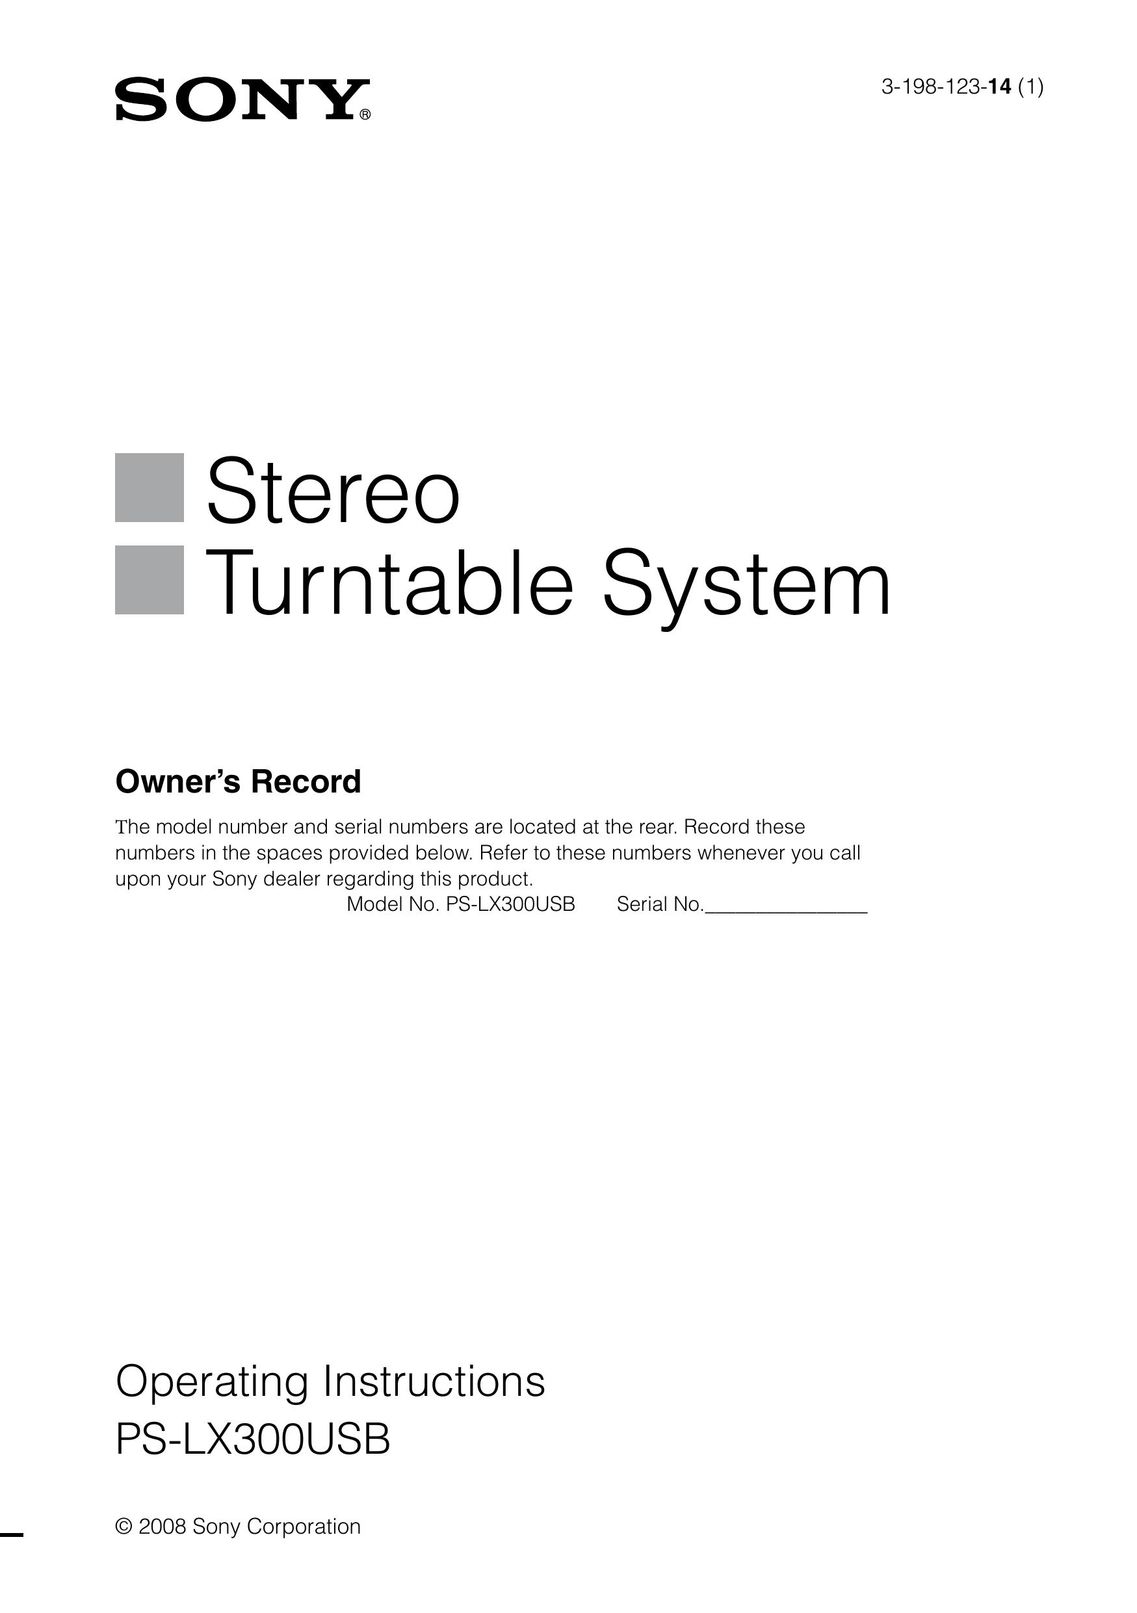 Sony PS-LX300USB Turntable User Manual